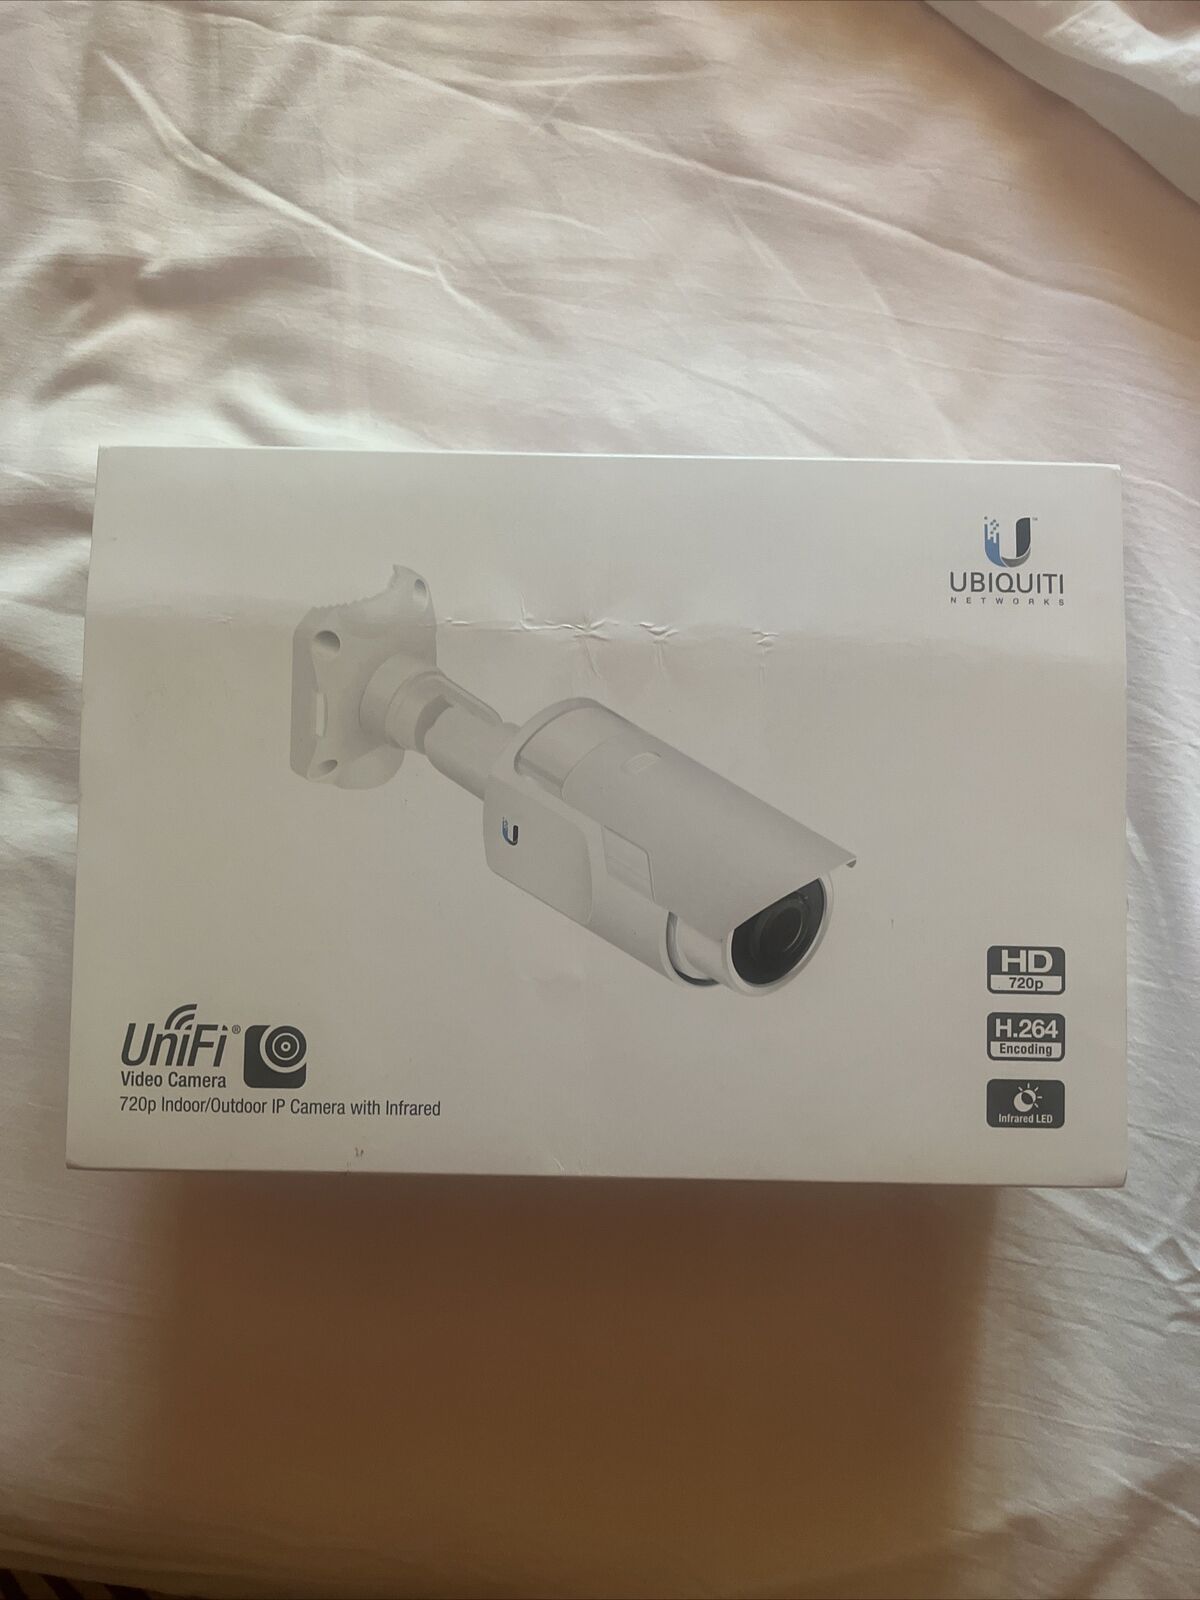 Image of VIDEO CAMERA UBIQUITI - 720p Indoor/outdoor - IP CAMERA WITH INFRARED